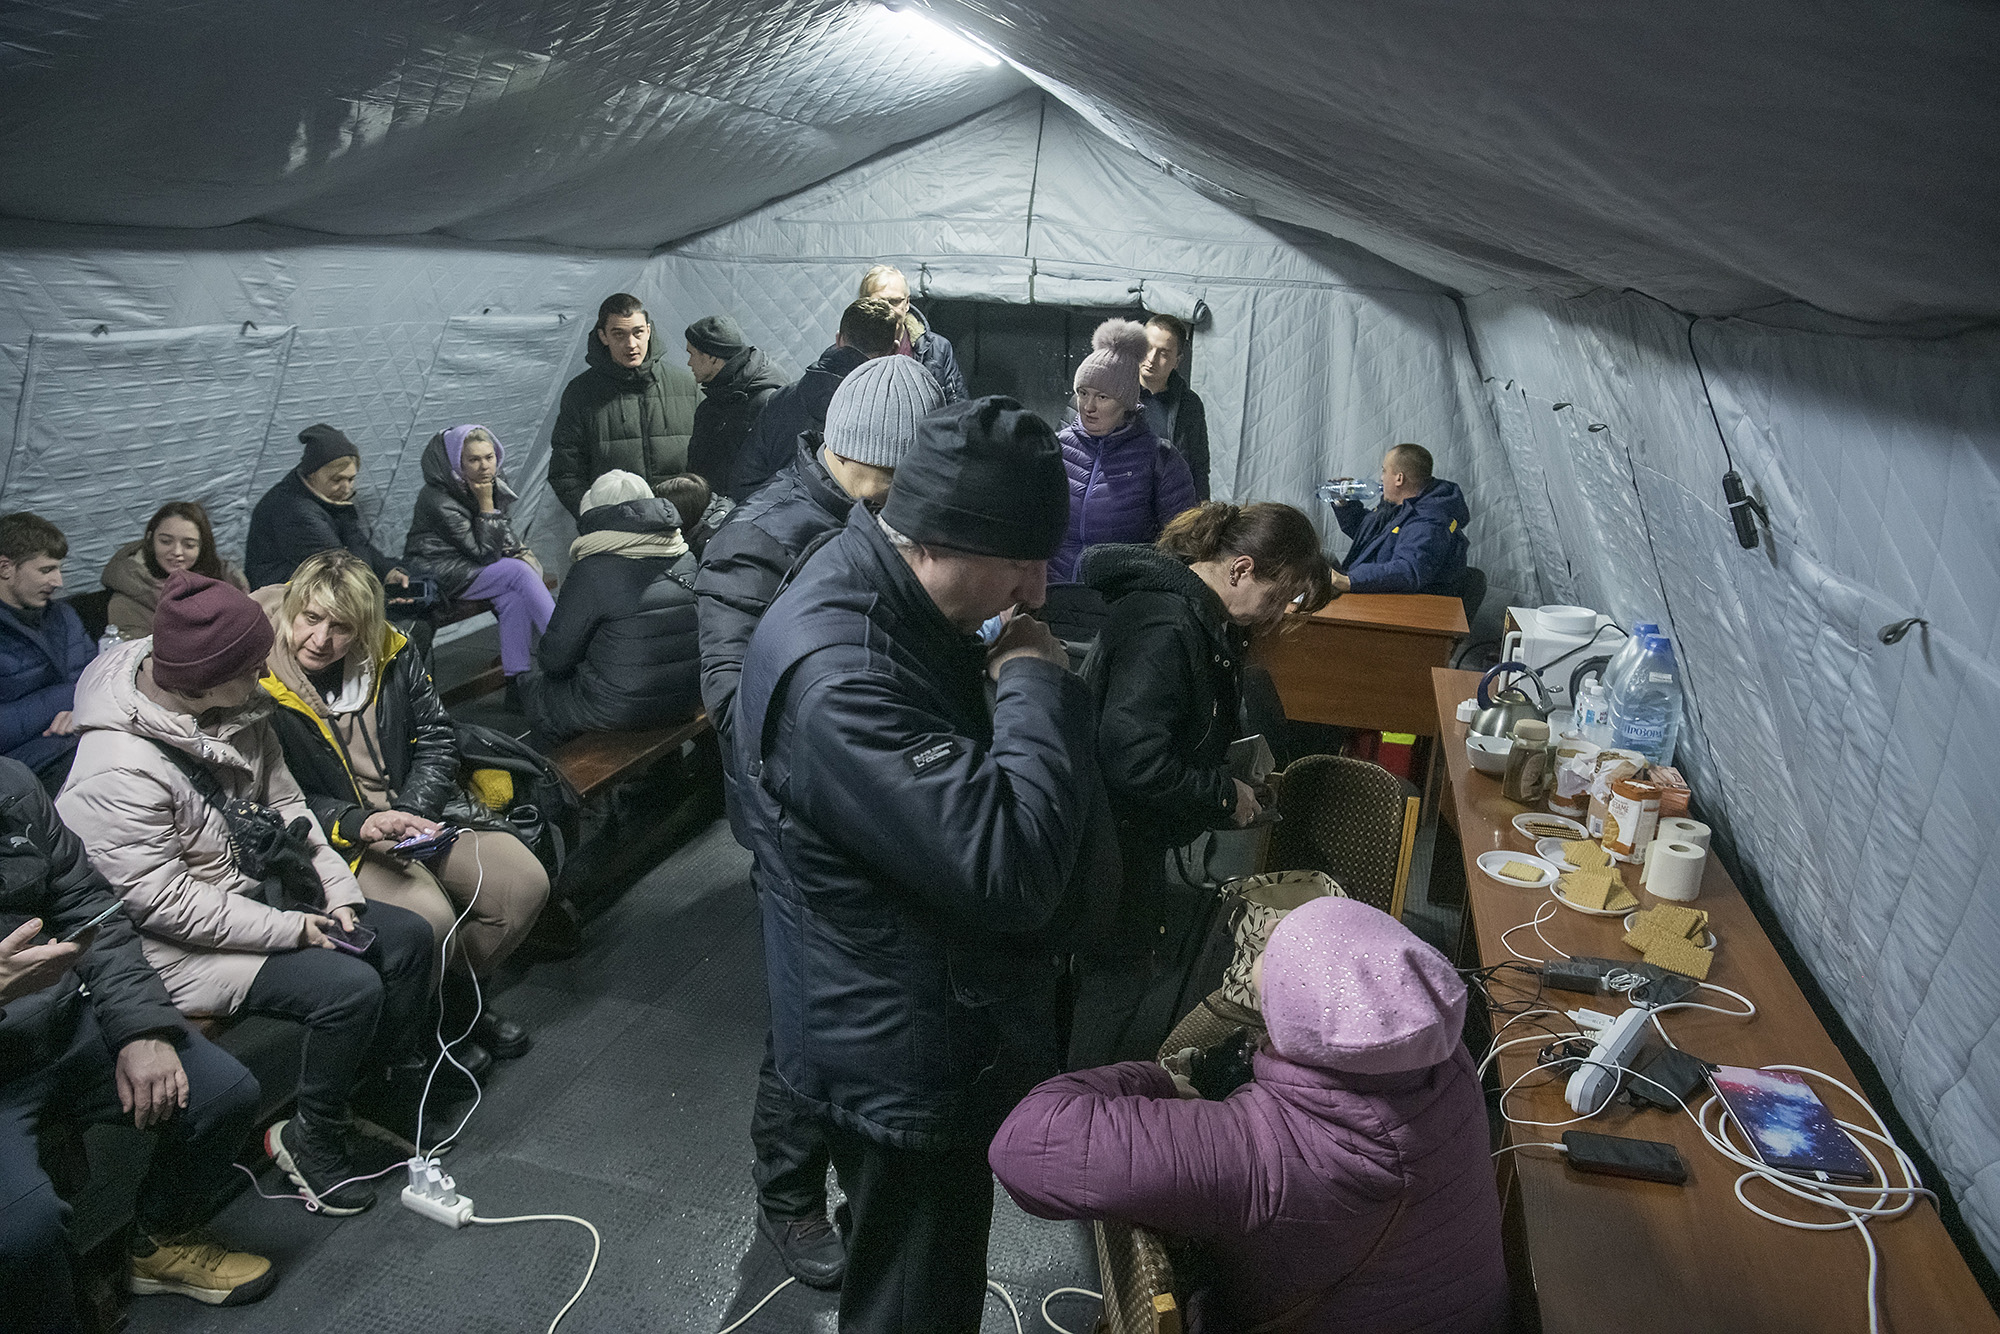 Local residents charge their devices, use internet connection and warm up inside Centre of Invincibility in Kyiv, Ukraine, on November 24.